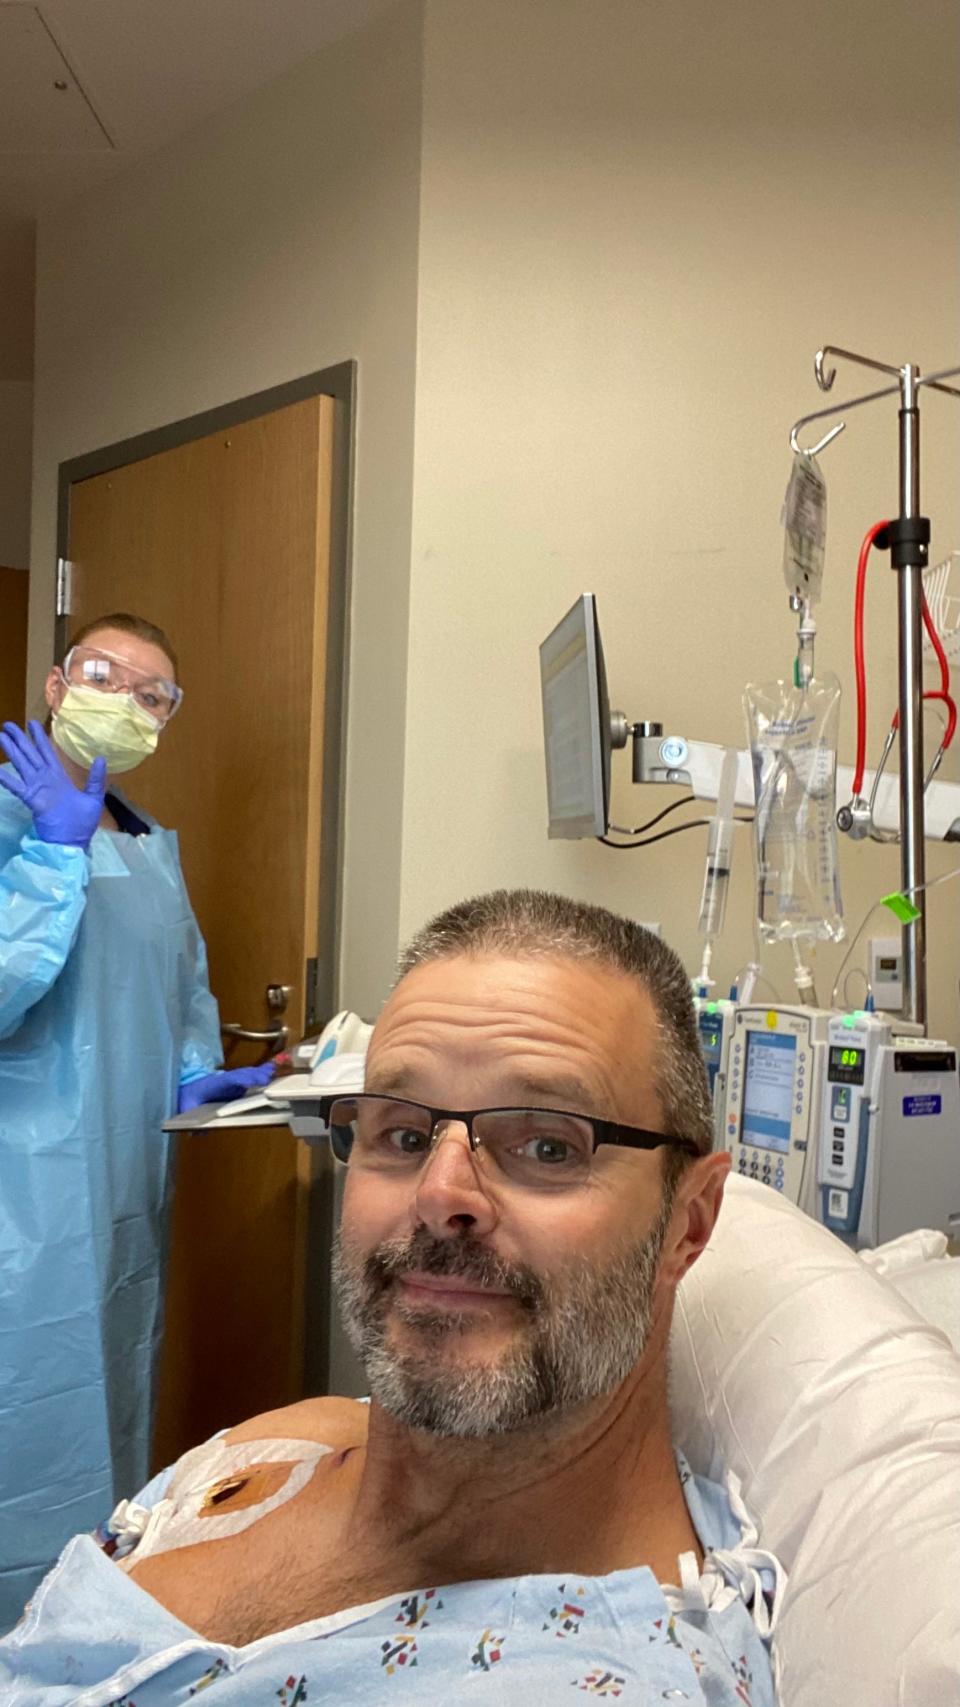 South Walton Fire District Lt. Steve Newsom receives treatment for multiple myeloma after his diagnosis in April 2020. Newsom is one of hundreds of firefighters who have been diagnosed with occupational cancer over the past decade.